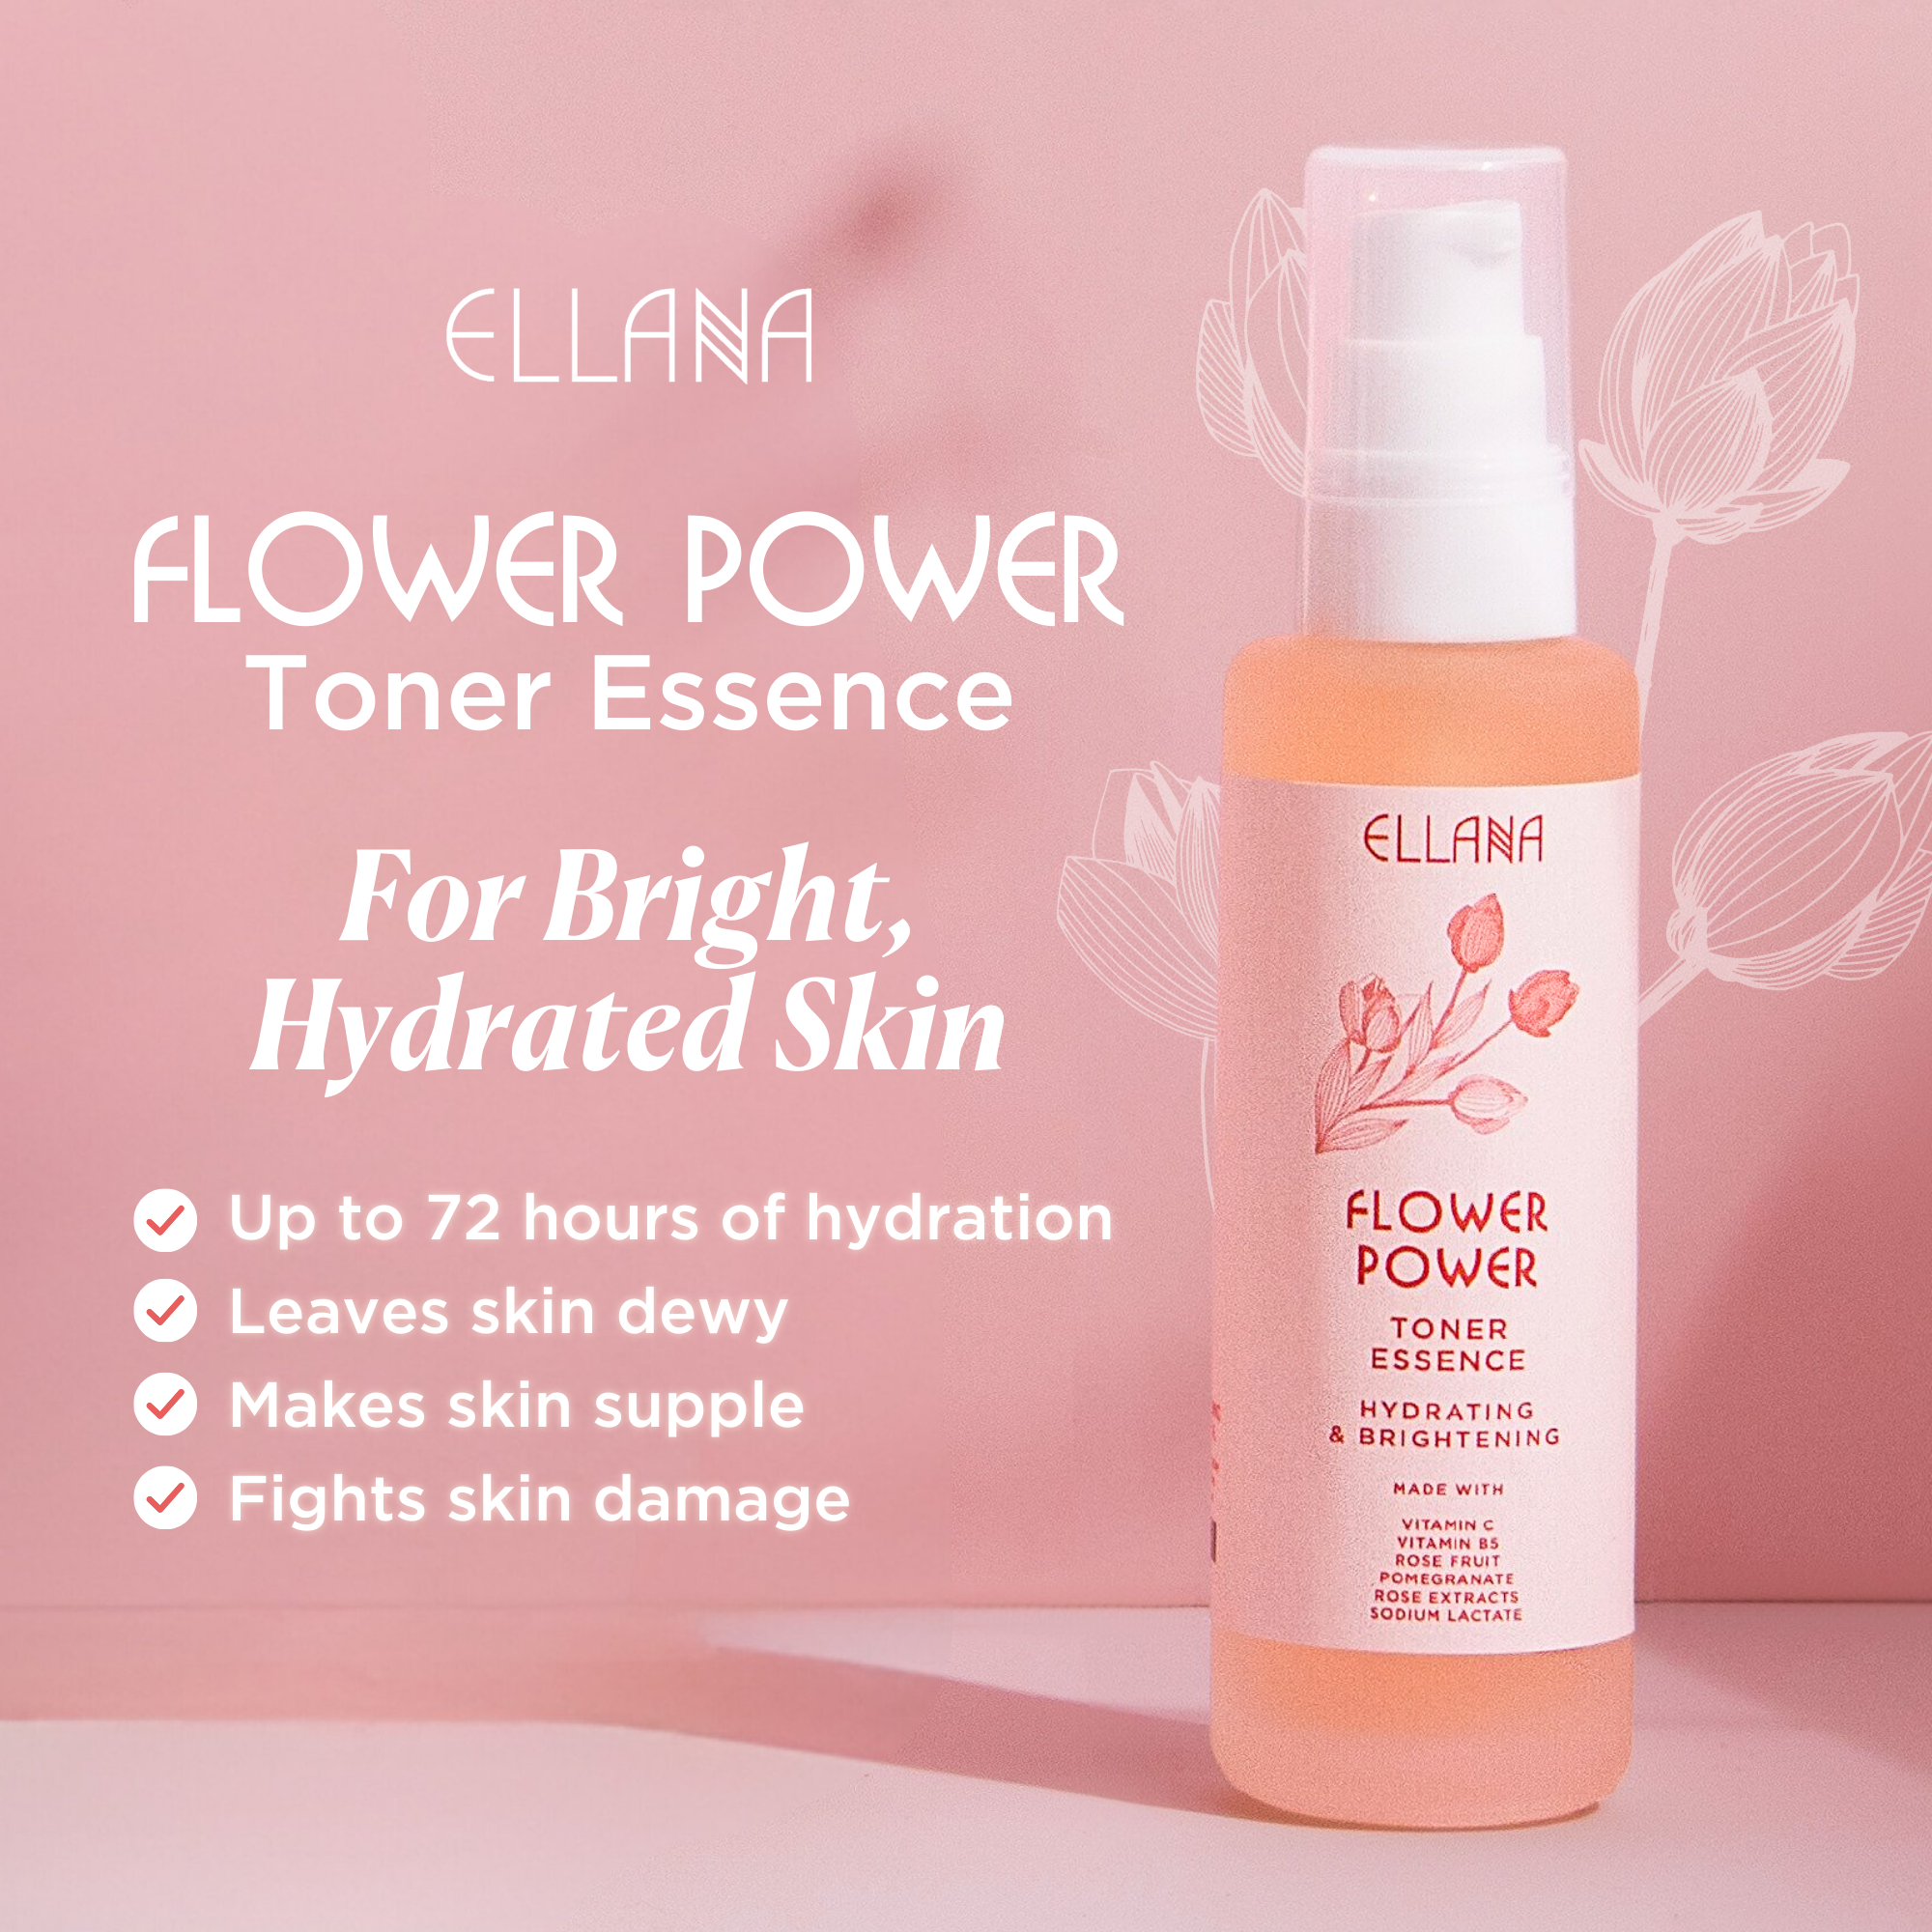 Flower Power Toner Essence, Hydrates and Brightens